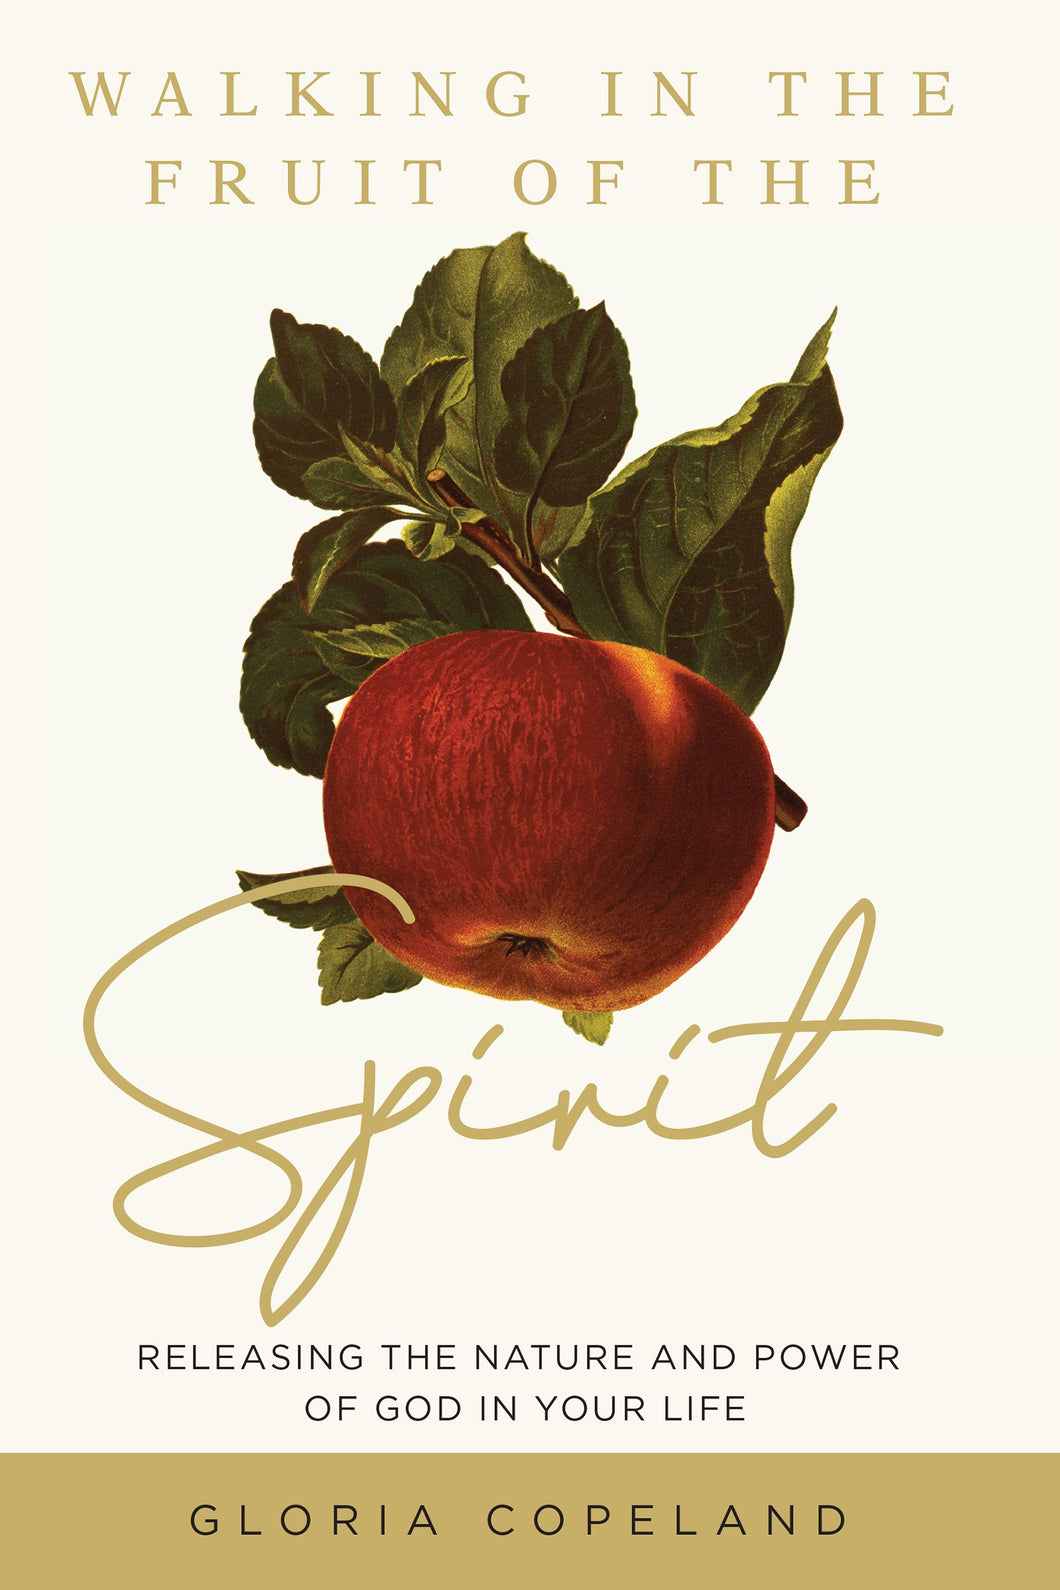 Walking in the Fruit of the Spirit